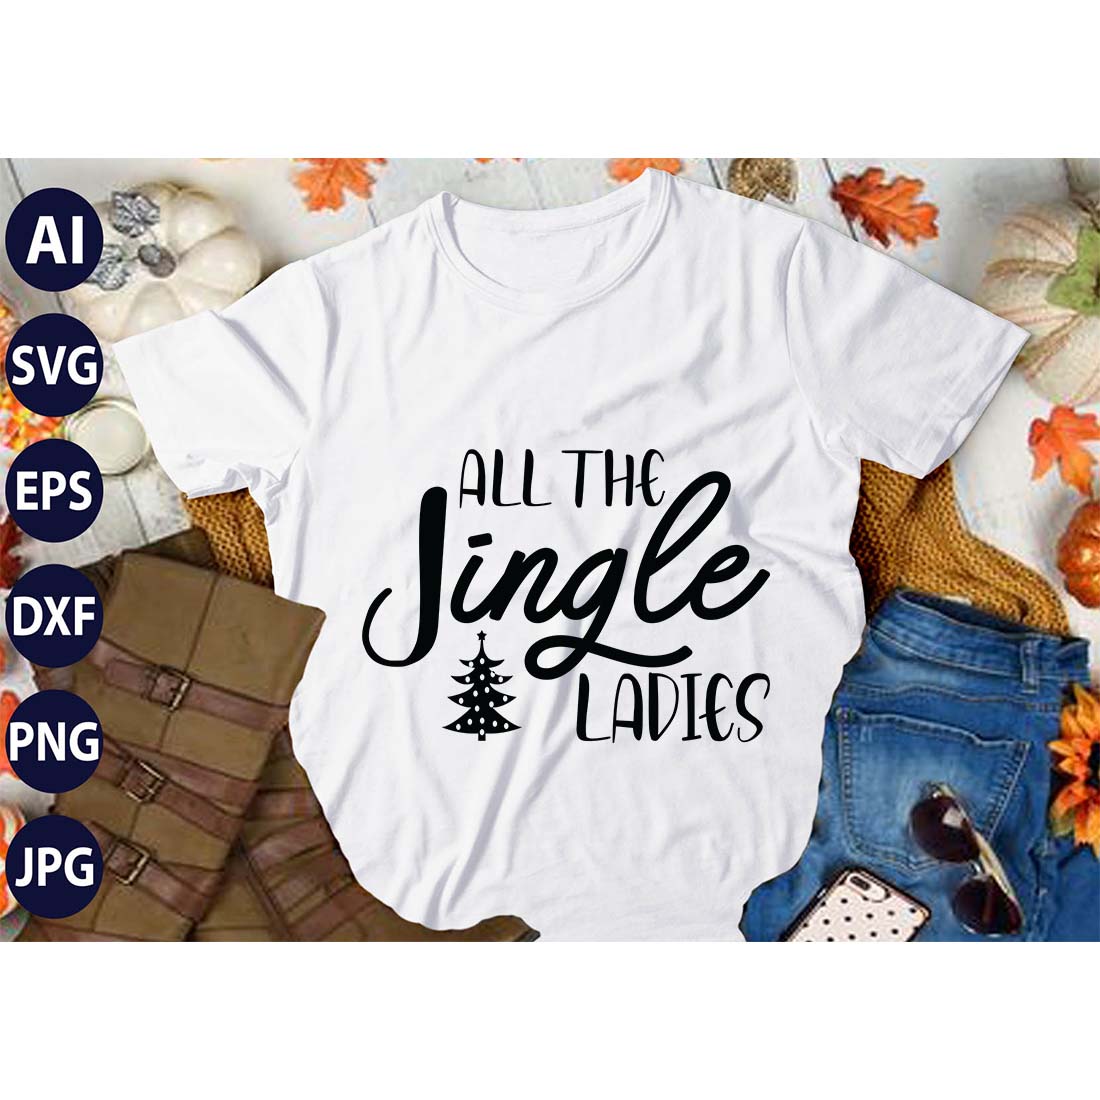 All The Jingle Ladies, SVG T-Shirt Design |Christmas Retro It's All About Jesus Typography Tshirt Design | Ai, Svg, Eps, Dxf, Jpeg, Png, Instant download T-Shirt | 100% print-ready Digital vector file preview image.